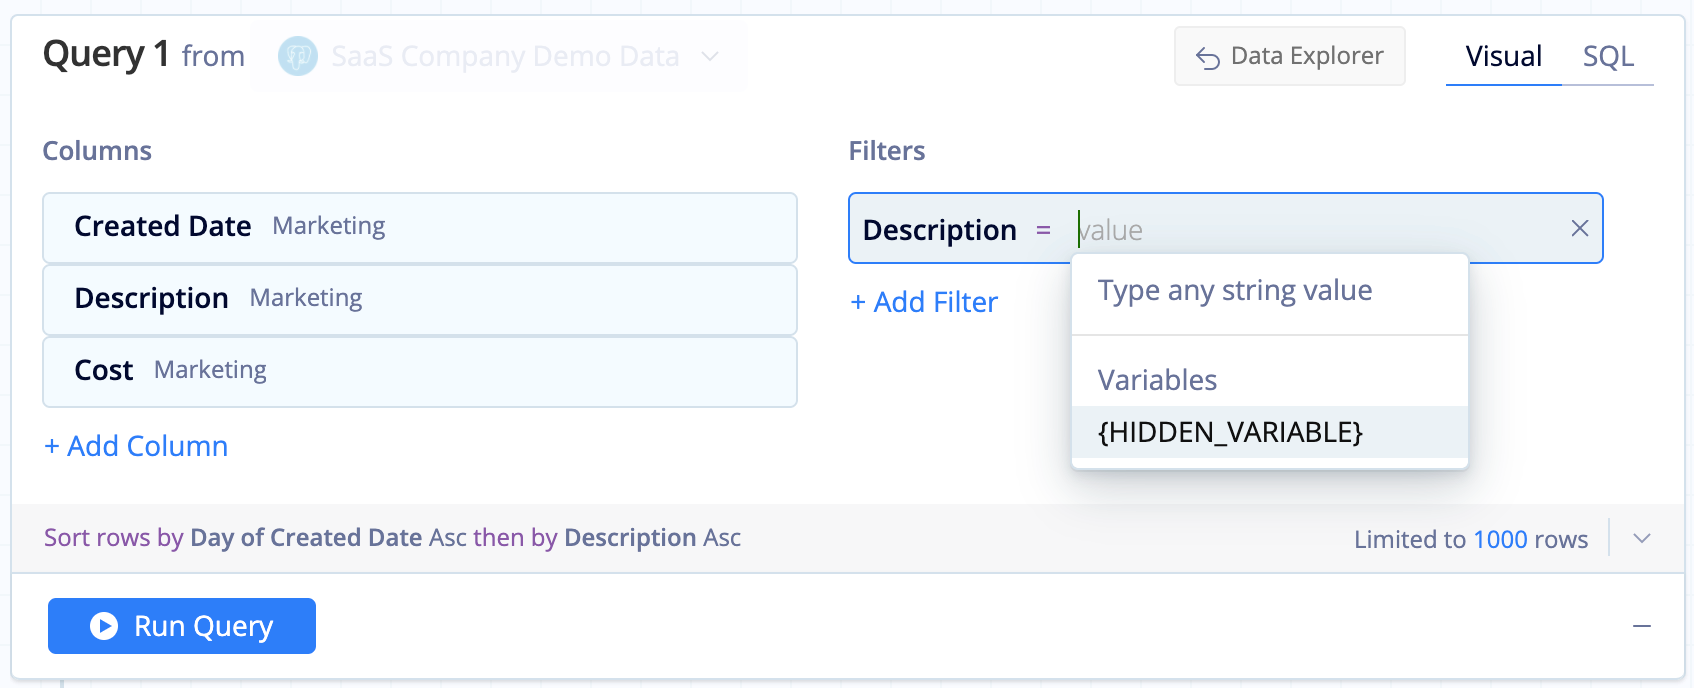 Connect a Hidden Variable to your chart by adding it as a filter